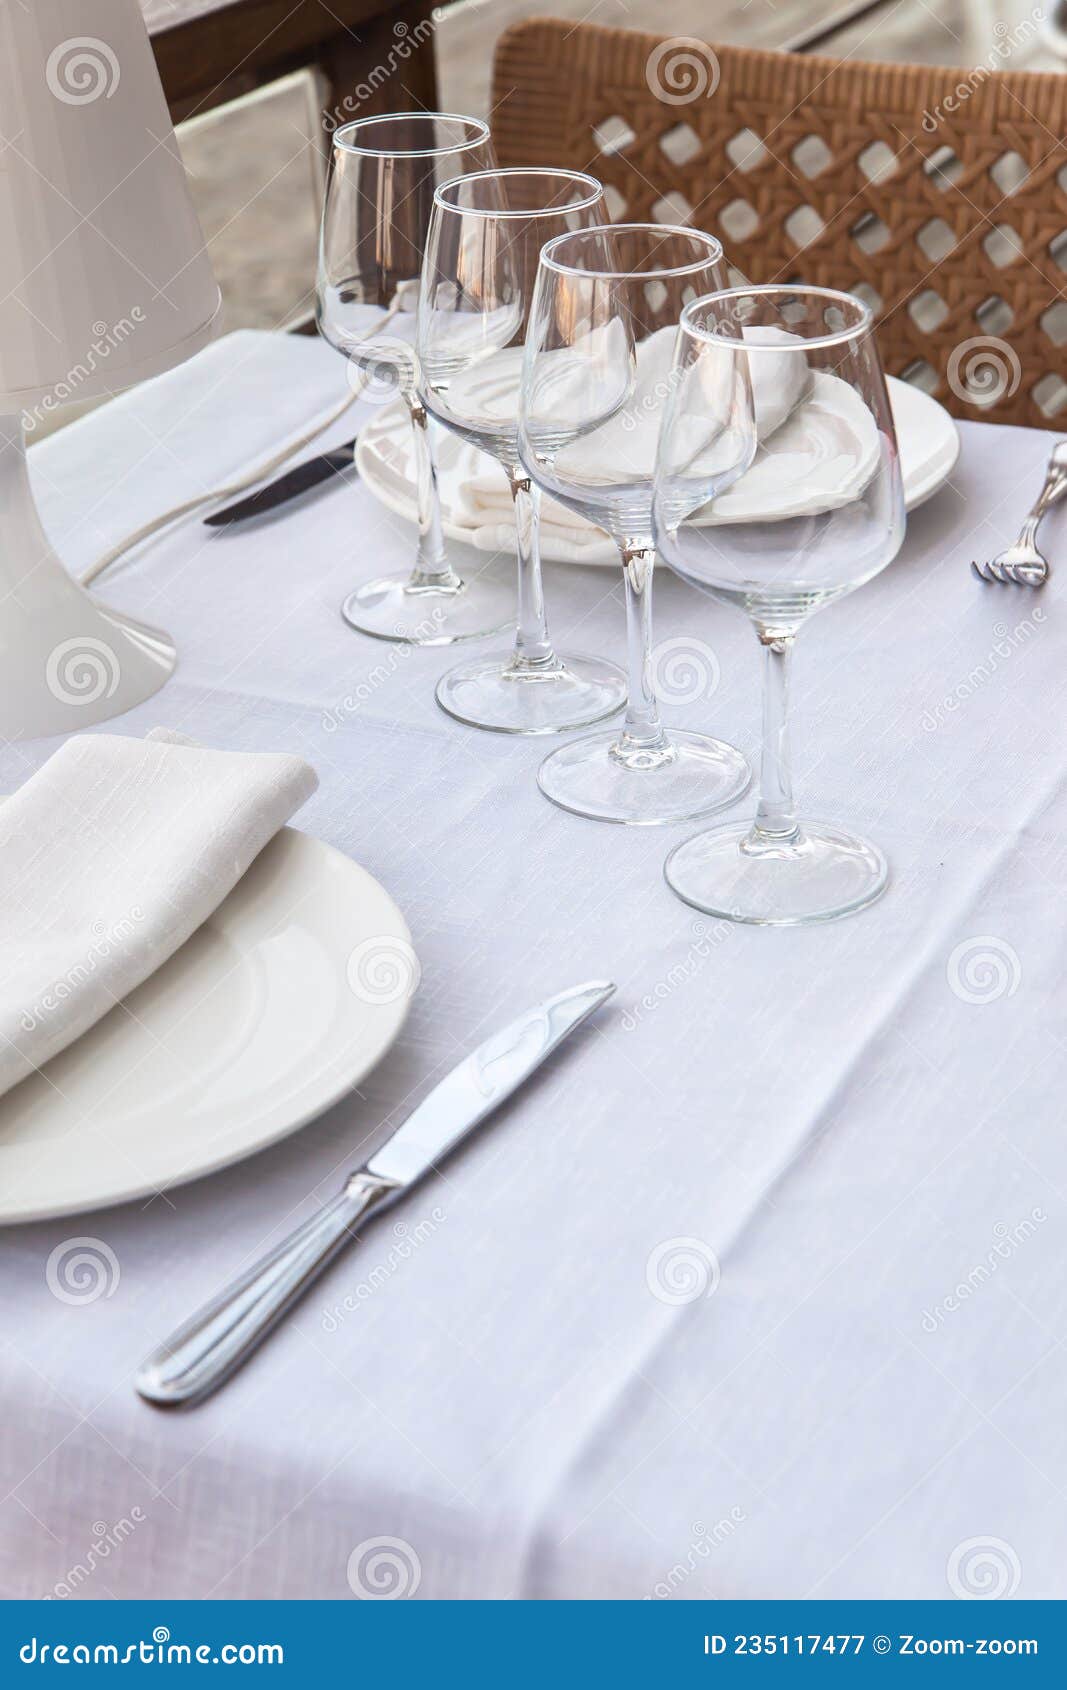 table setting at restaurant ready to serve